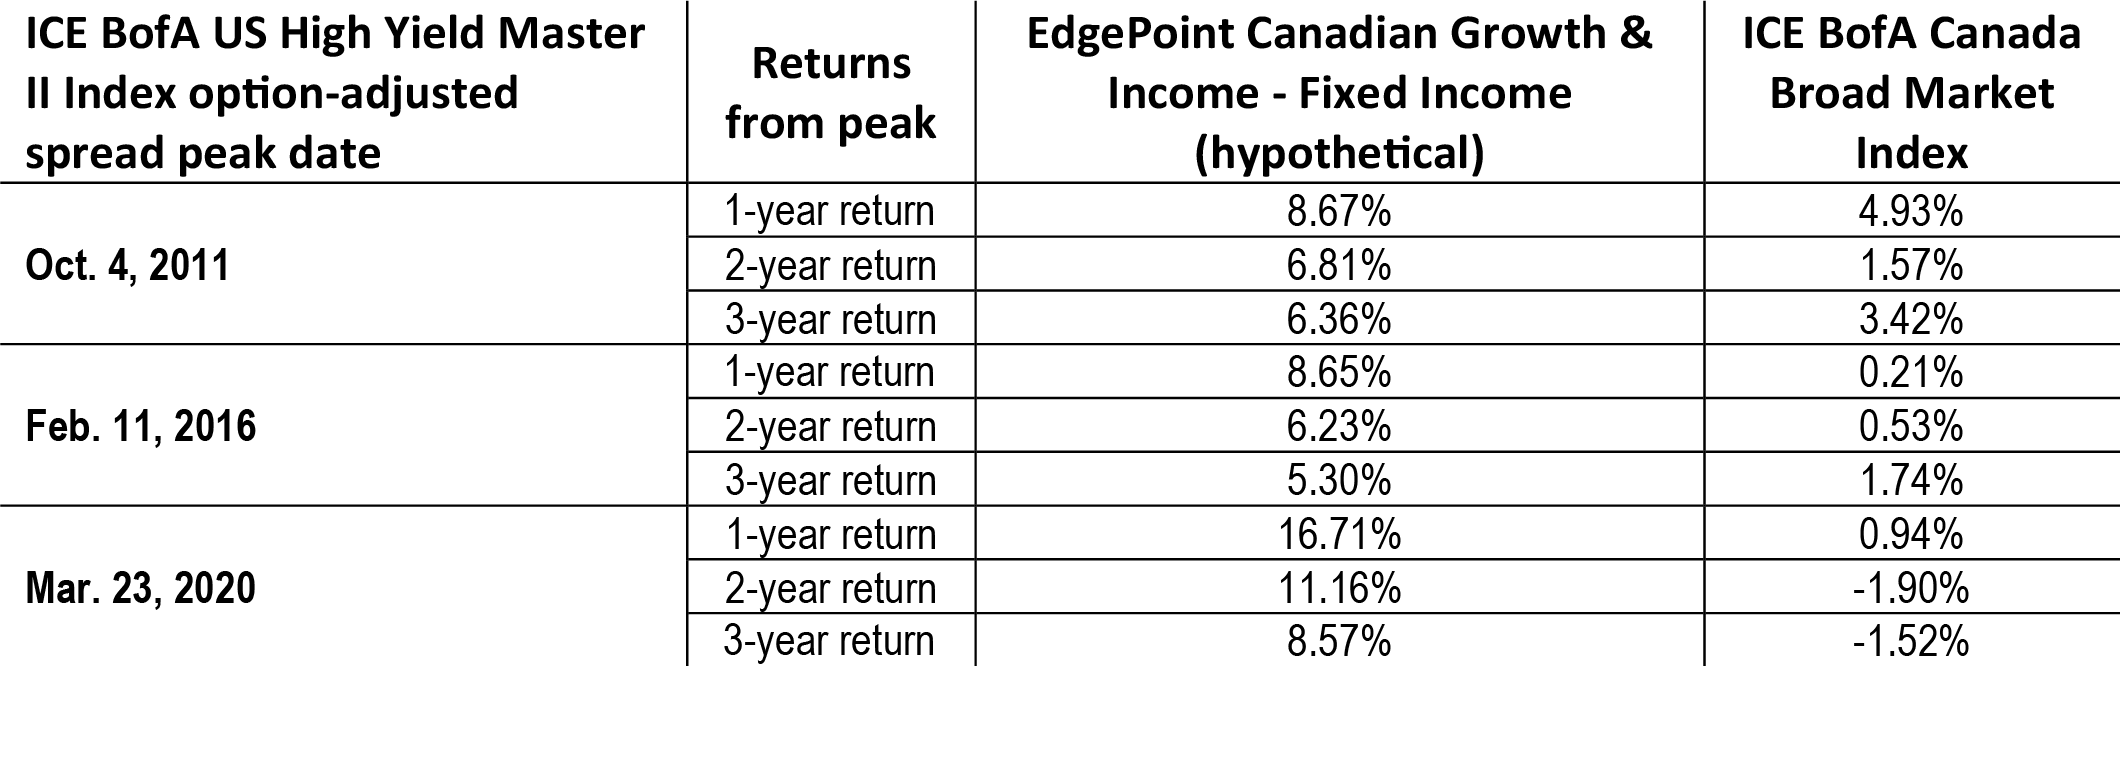 A table showing the 1-, 2- and 3-year returns of the fixed income portion of the EdgePoint Canadian Growth & Iincome Portfolio and the ICE BofA Canada Broad Market Index during three peak dates: October 4, 2011, February 11, 2016 and March 23, 2020. In all cases, the average annualized returns for the EdgePoint fixed income were higher than the index.